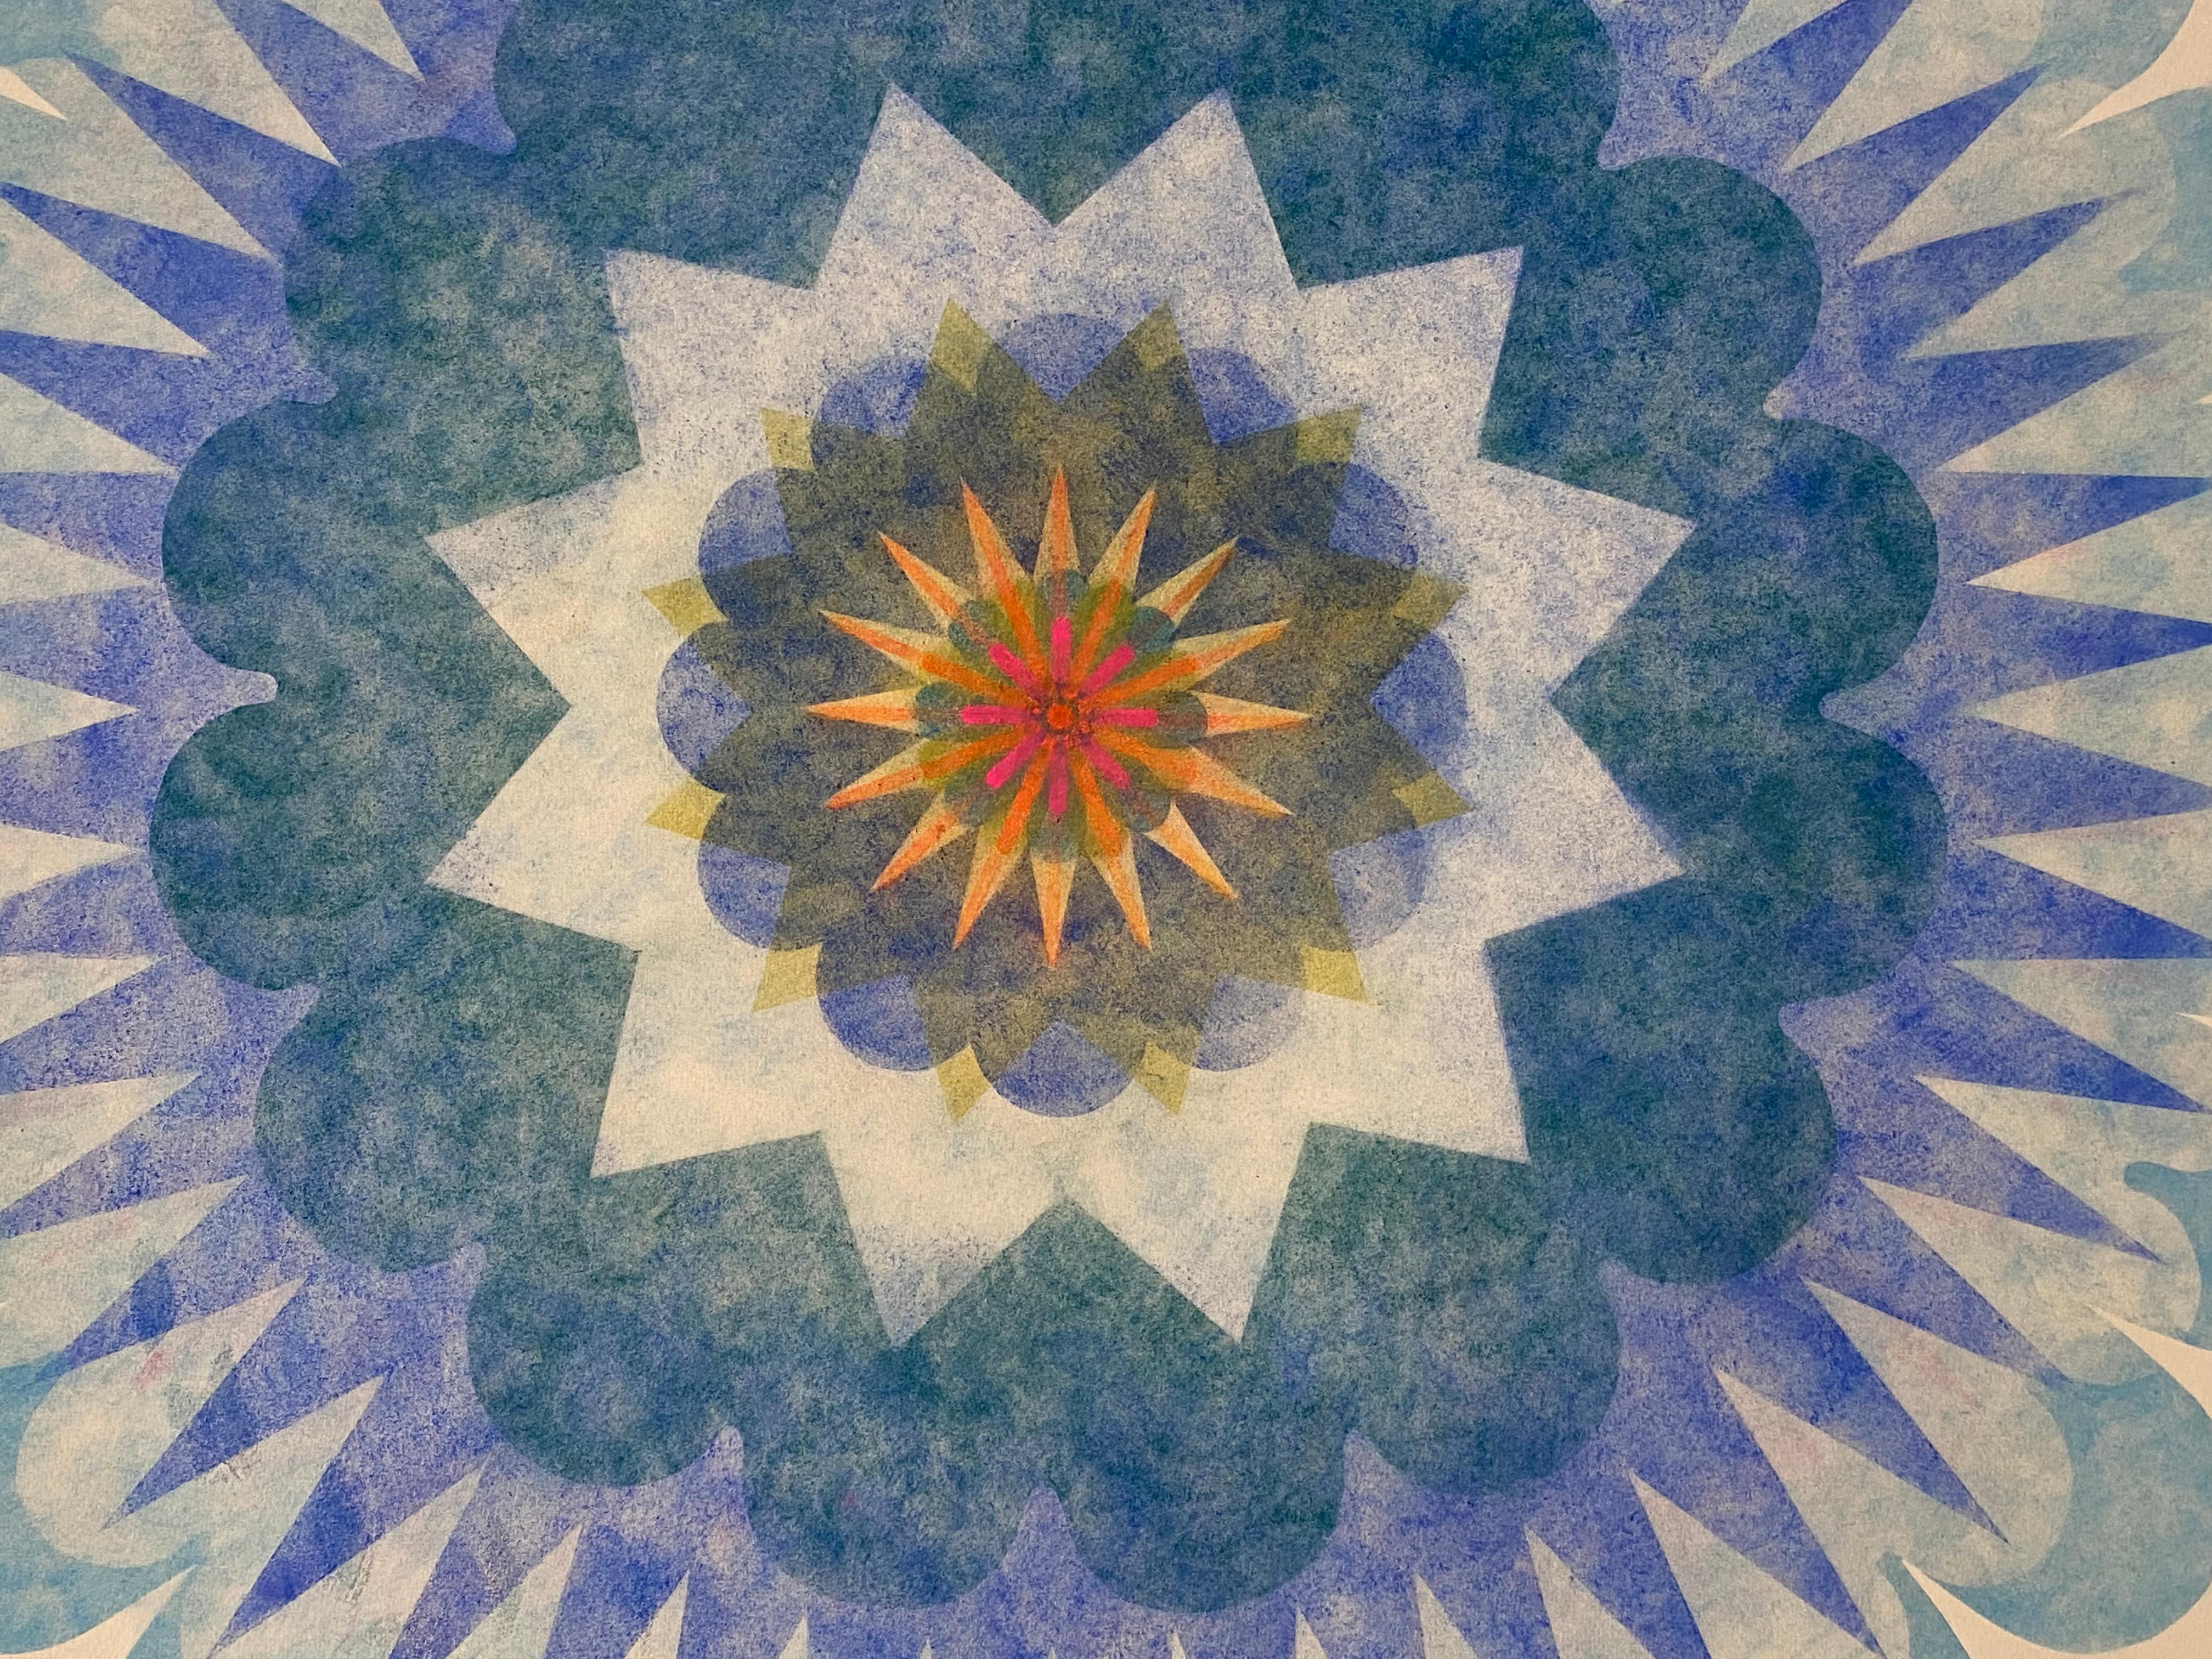 Poptic 24, Flower Mandala, Light Blue, Orange, Bright Red, Yellow - Gray Abstract Drawing by Mary Judge